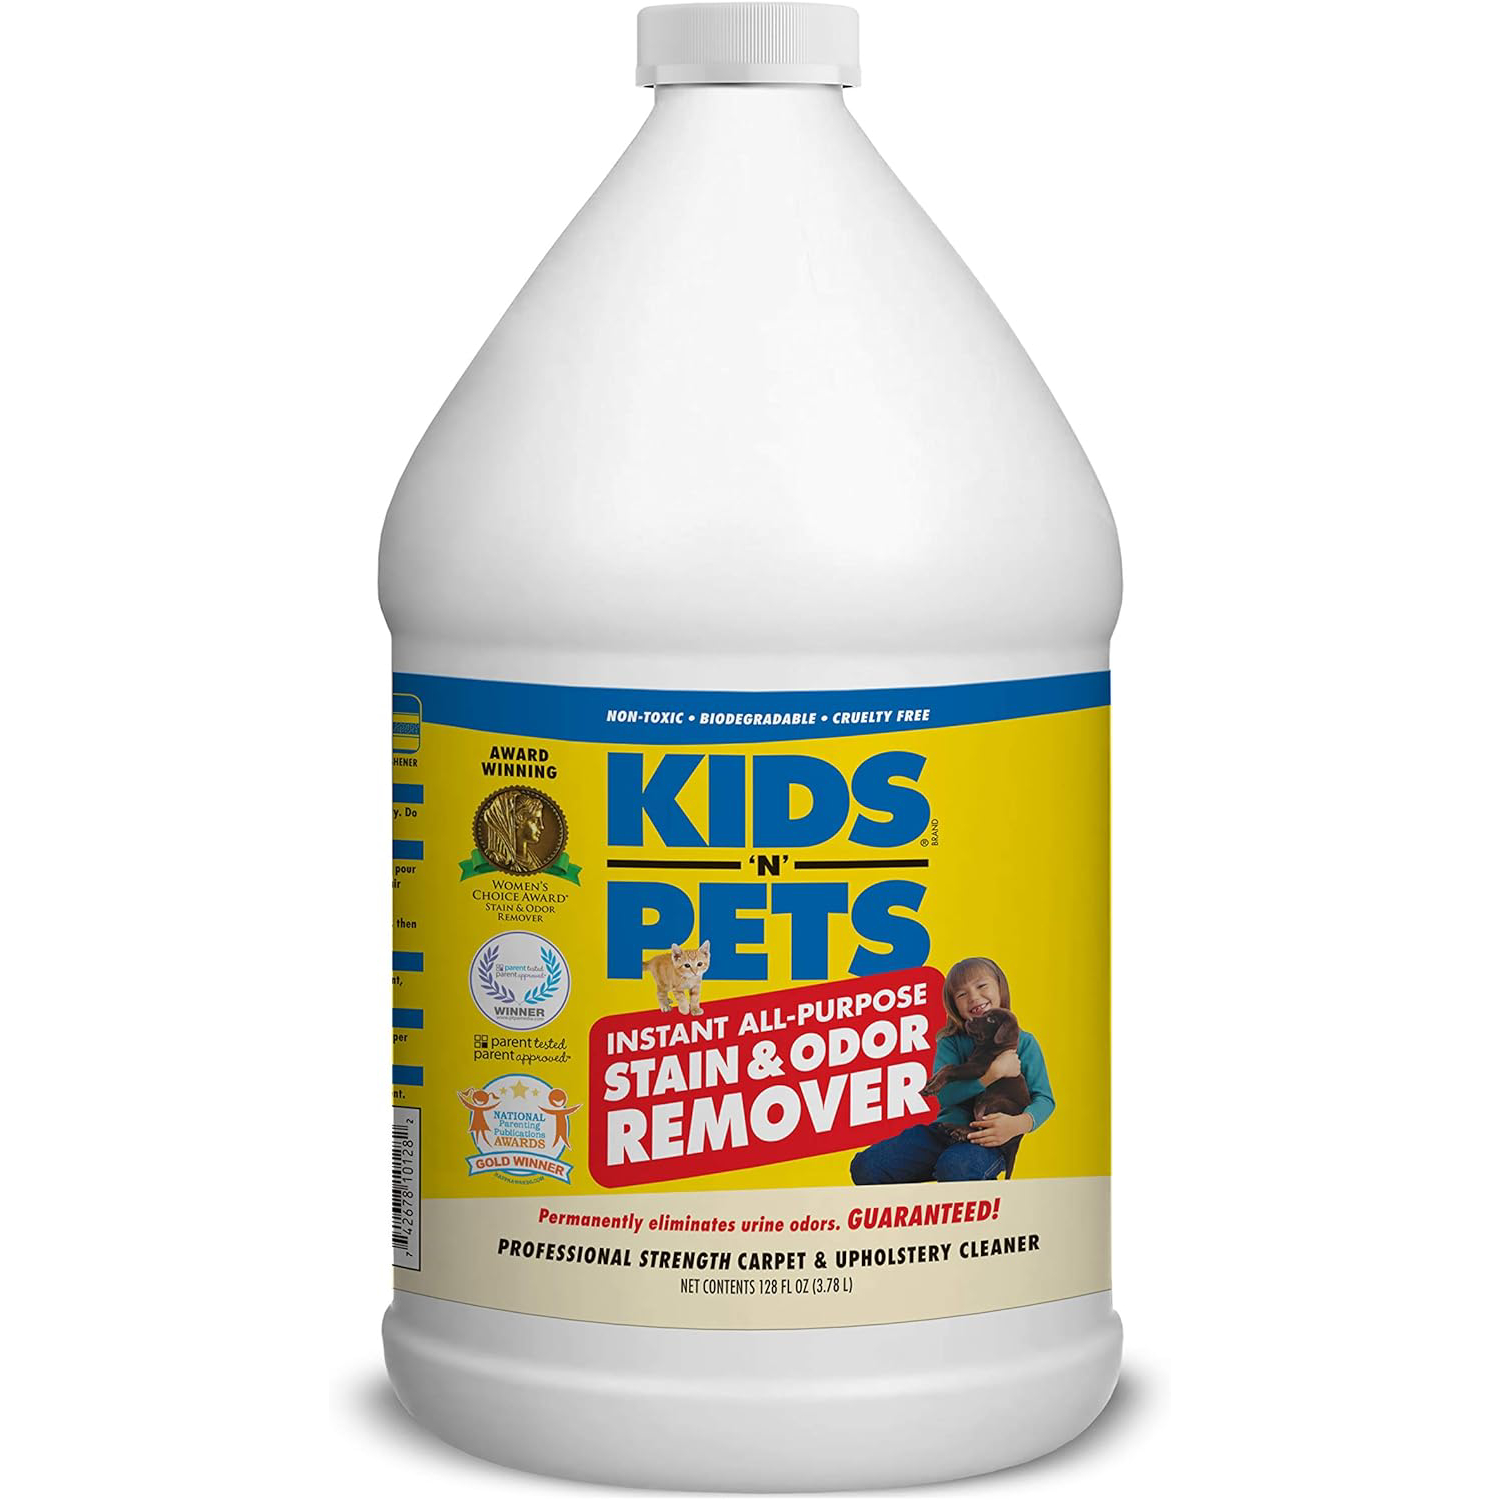 KIDS 'N' PETS - Instant All-Purpose Stain & Odor Remover